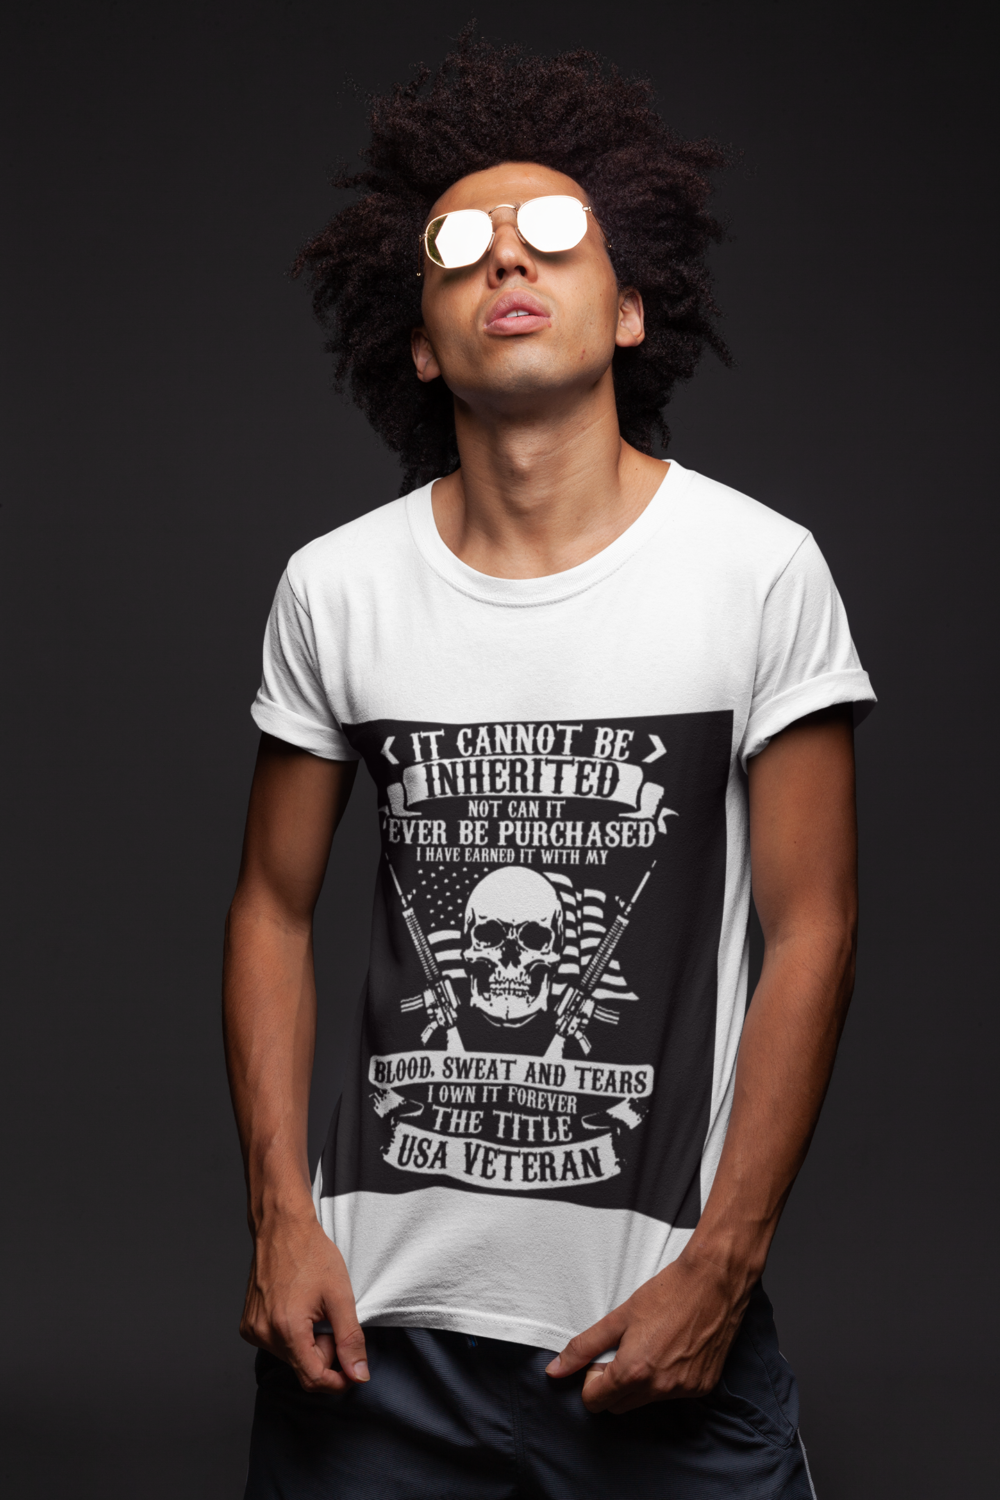 t shirt mockup of a man with dark glasses under a bright light 22859 1